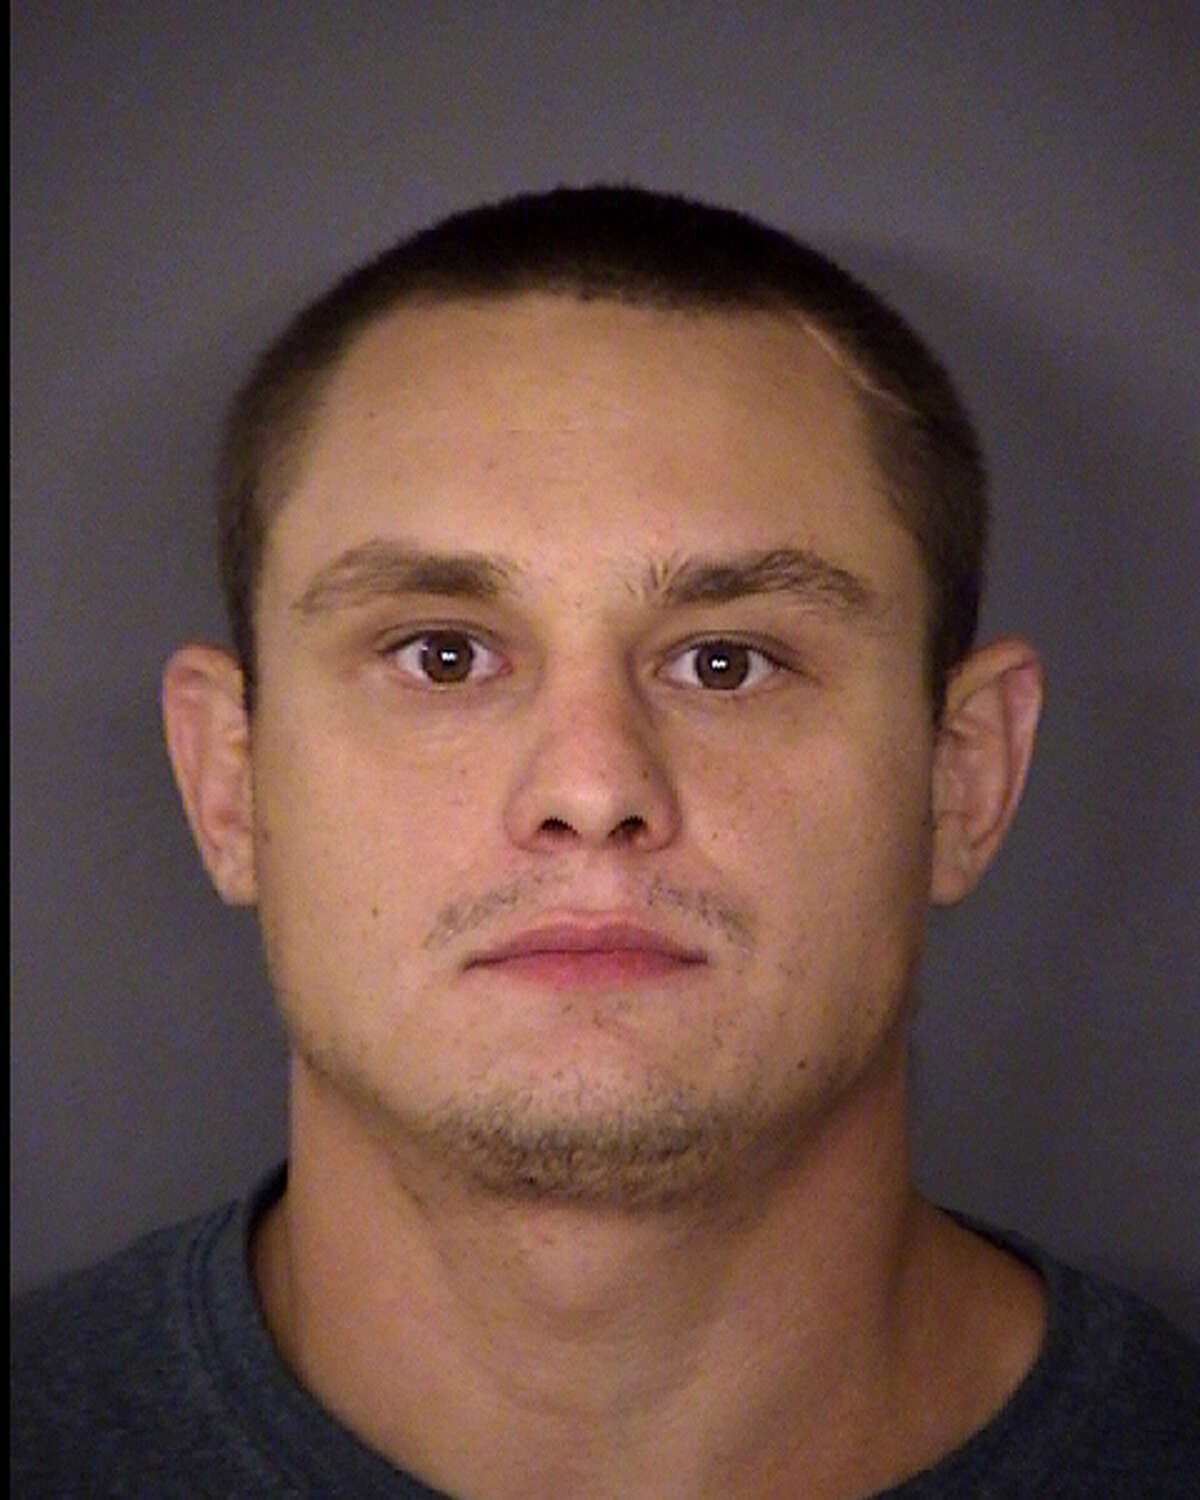 Army Spc. Cody McCollom, who lives at Fort Sam Houston, was arrested Tuesday on aggravated robbery charges.